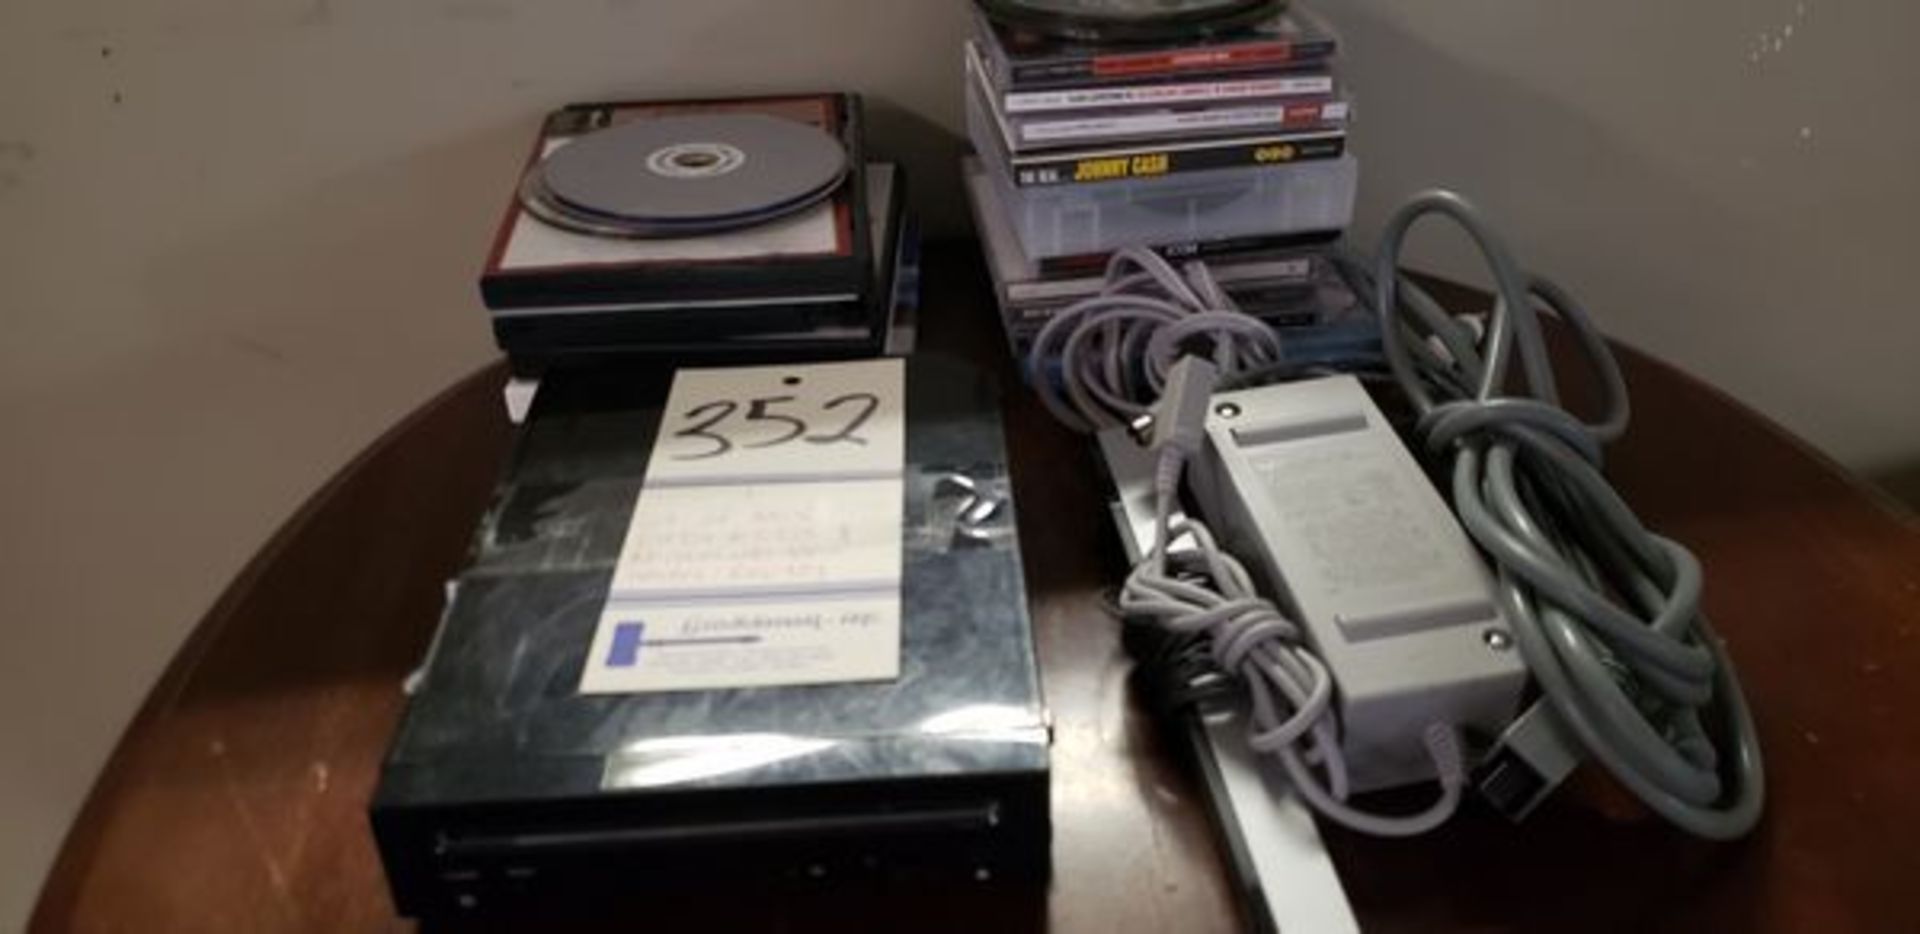 LOT OF MISCELLANEOUS DVDS AND CDS, WITH A NINTENDO Wii MODEL RVL-101 - Image 3 of 3